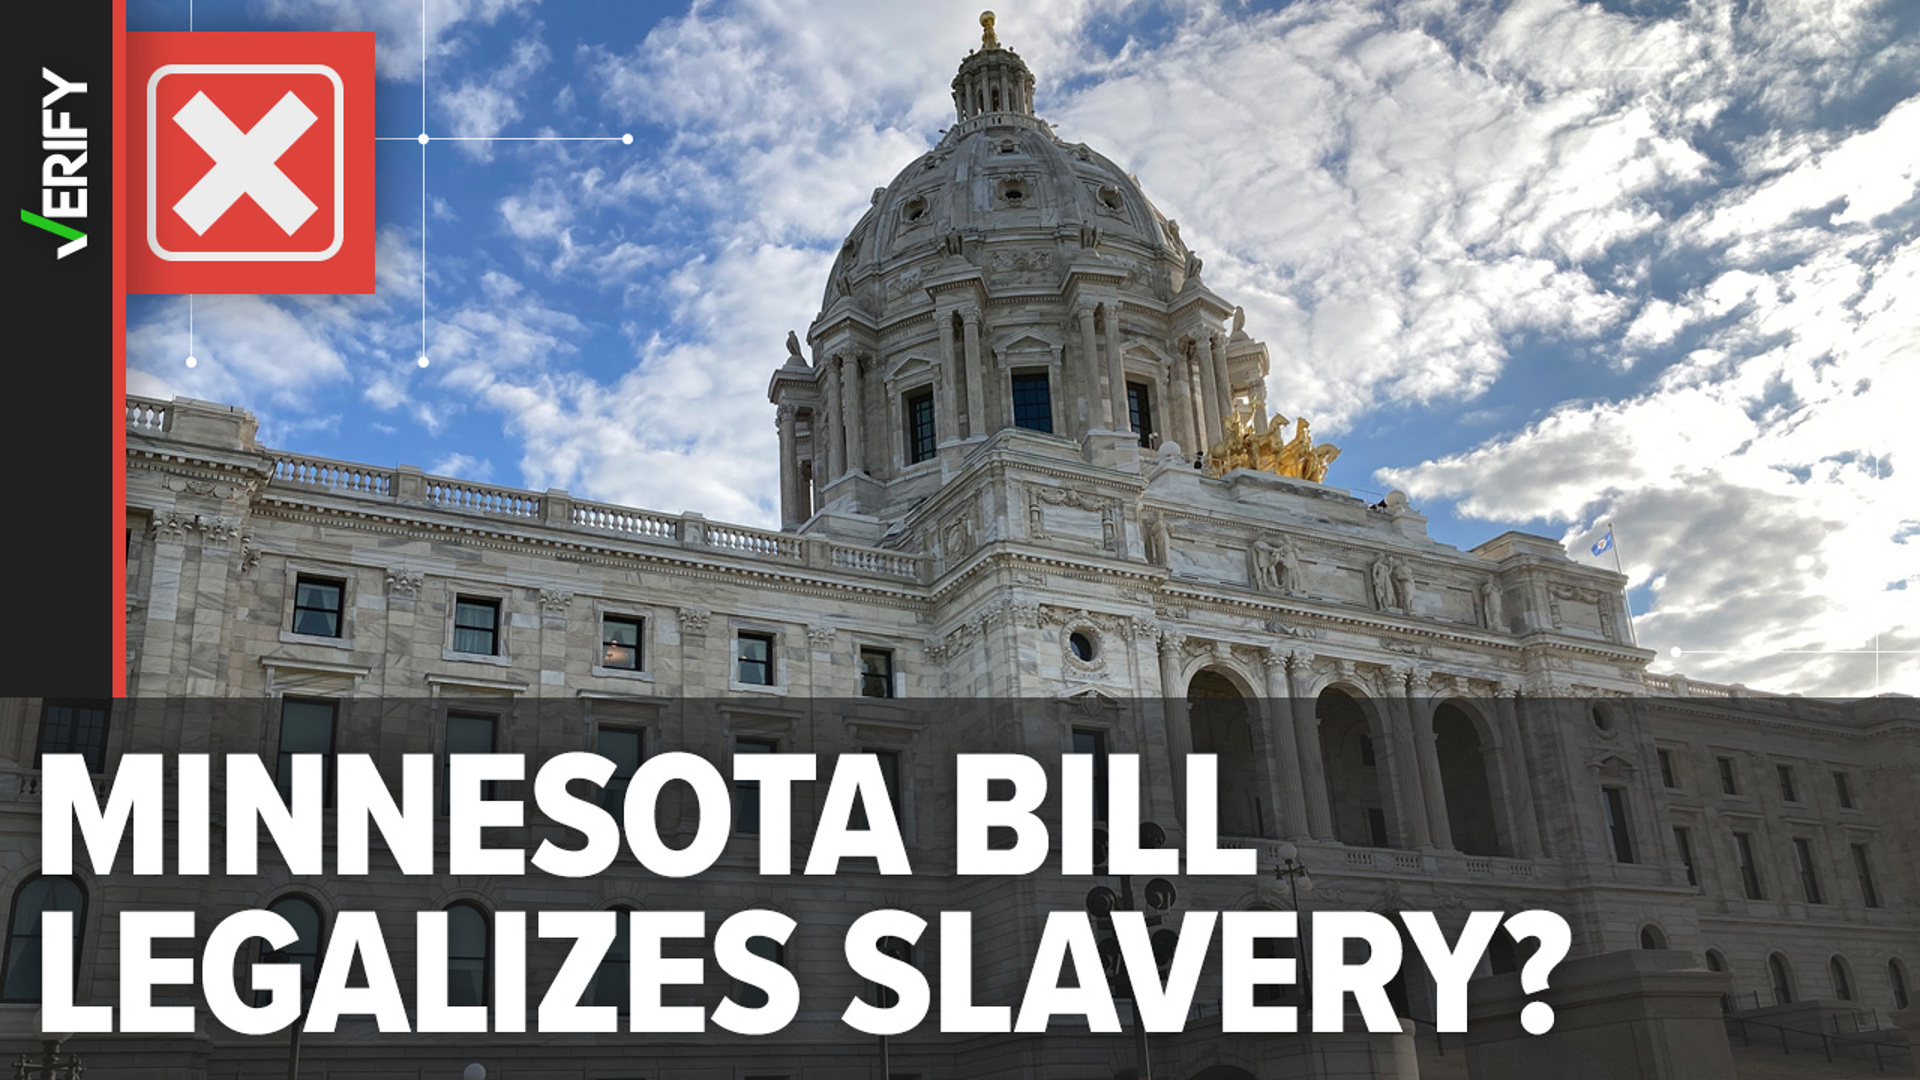 Viral videos have led some people to believe that a Minnesota bill would legalize slavery. It would actually establish a legal framework for surrogacy agreements.